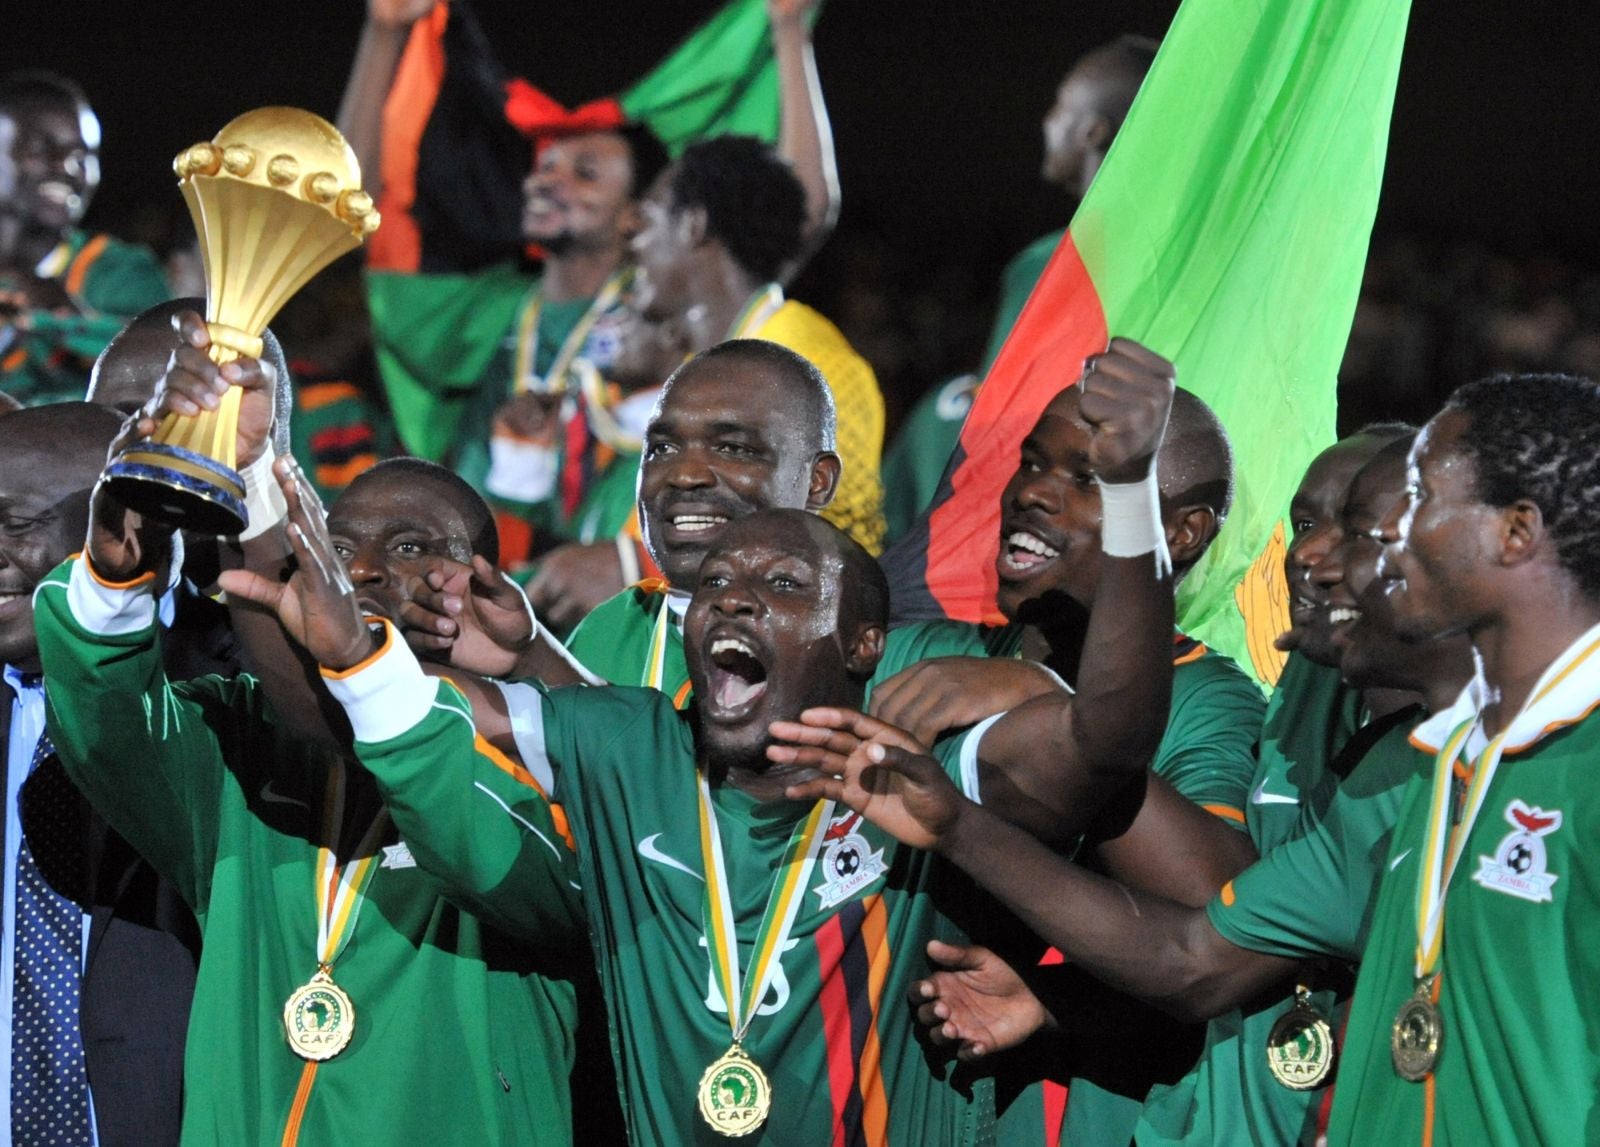 The victorious Zambian team after winning the African Cup of Nations in 2012. Photo: Getty